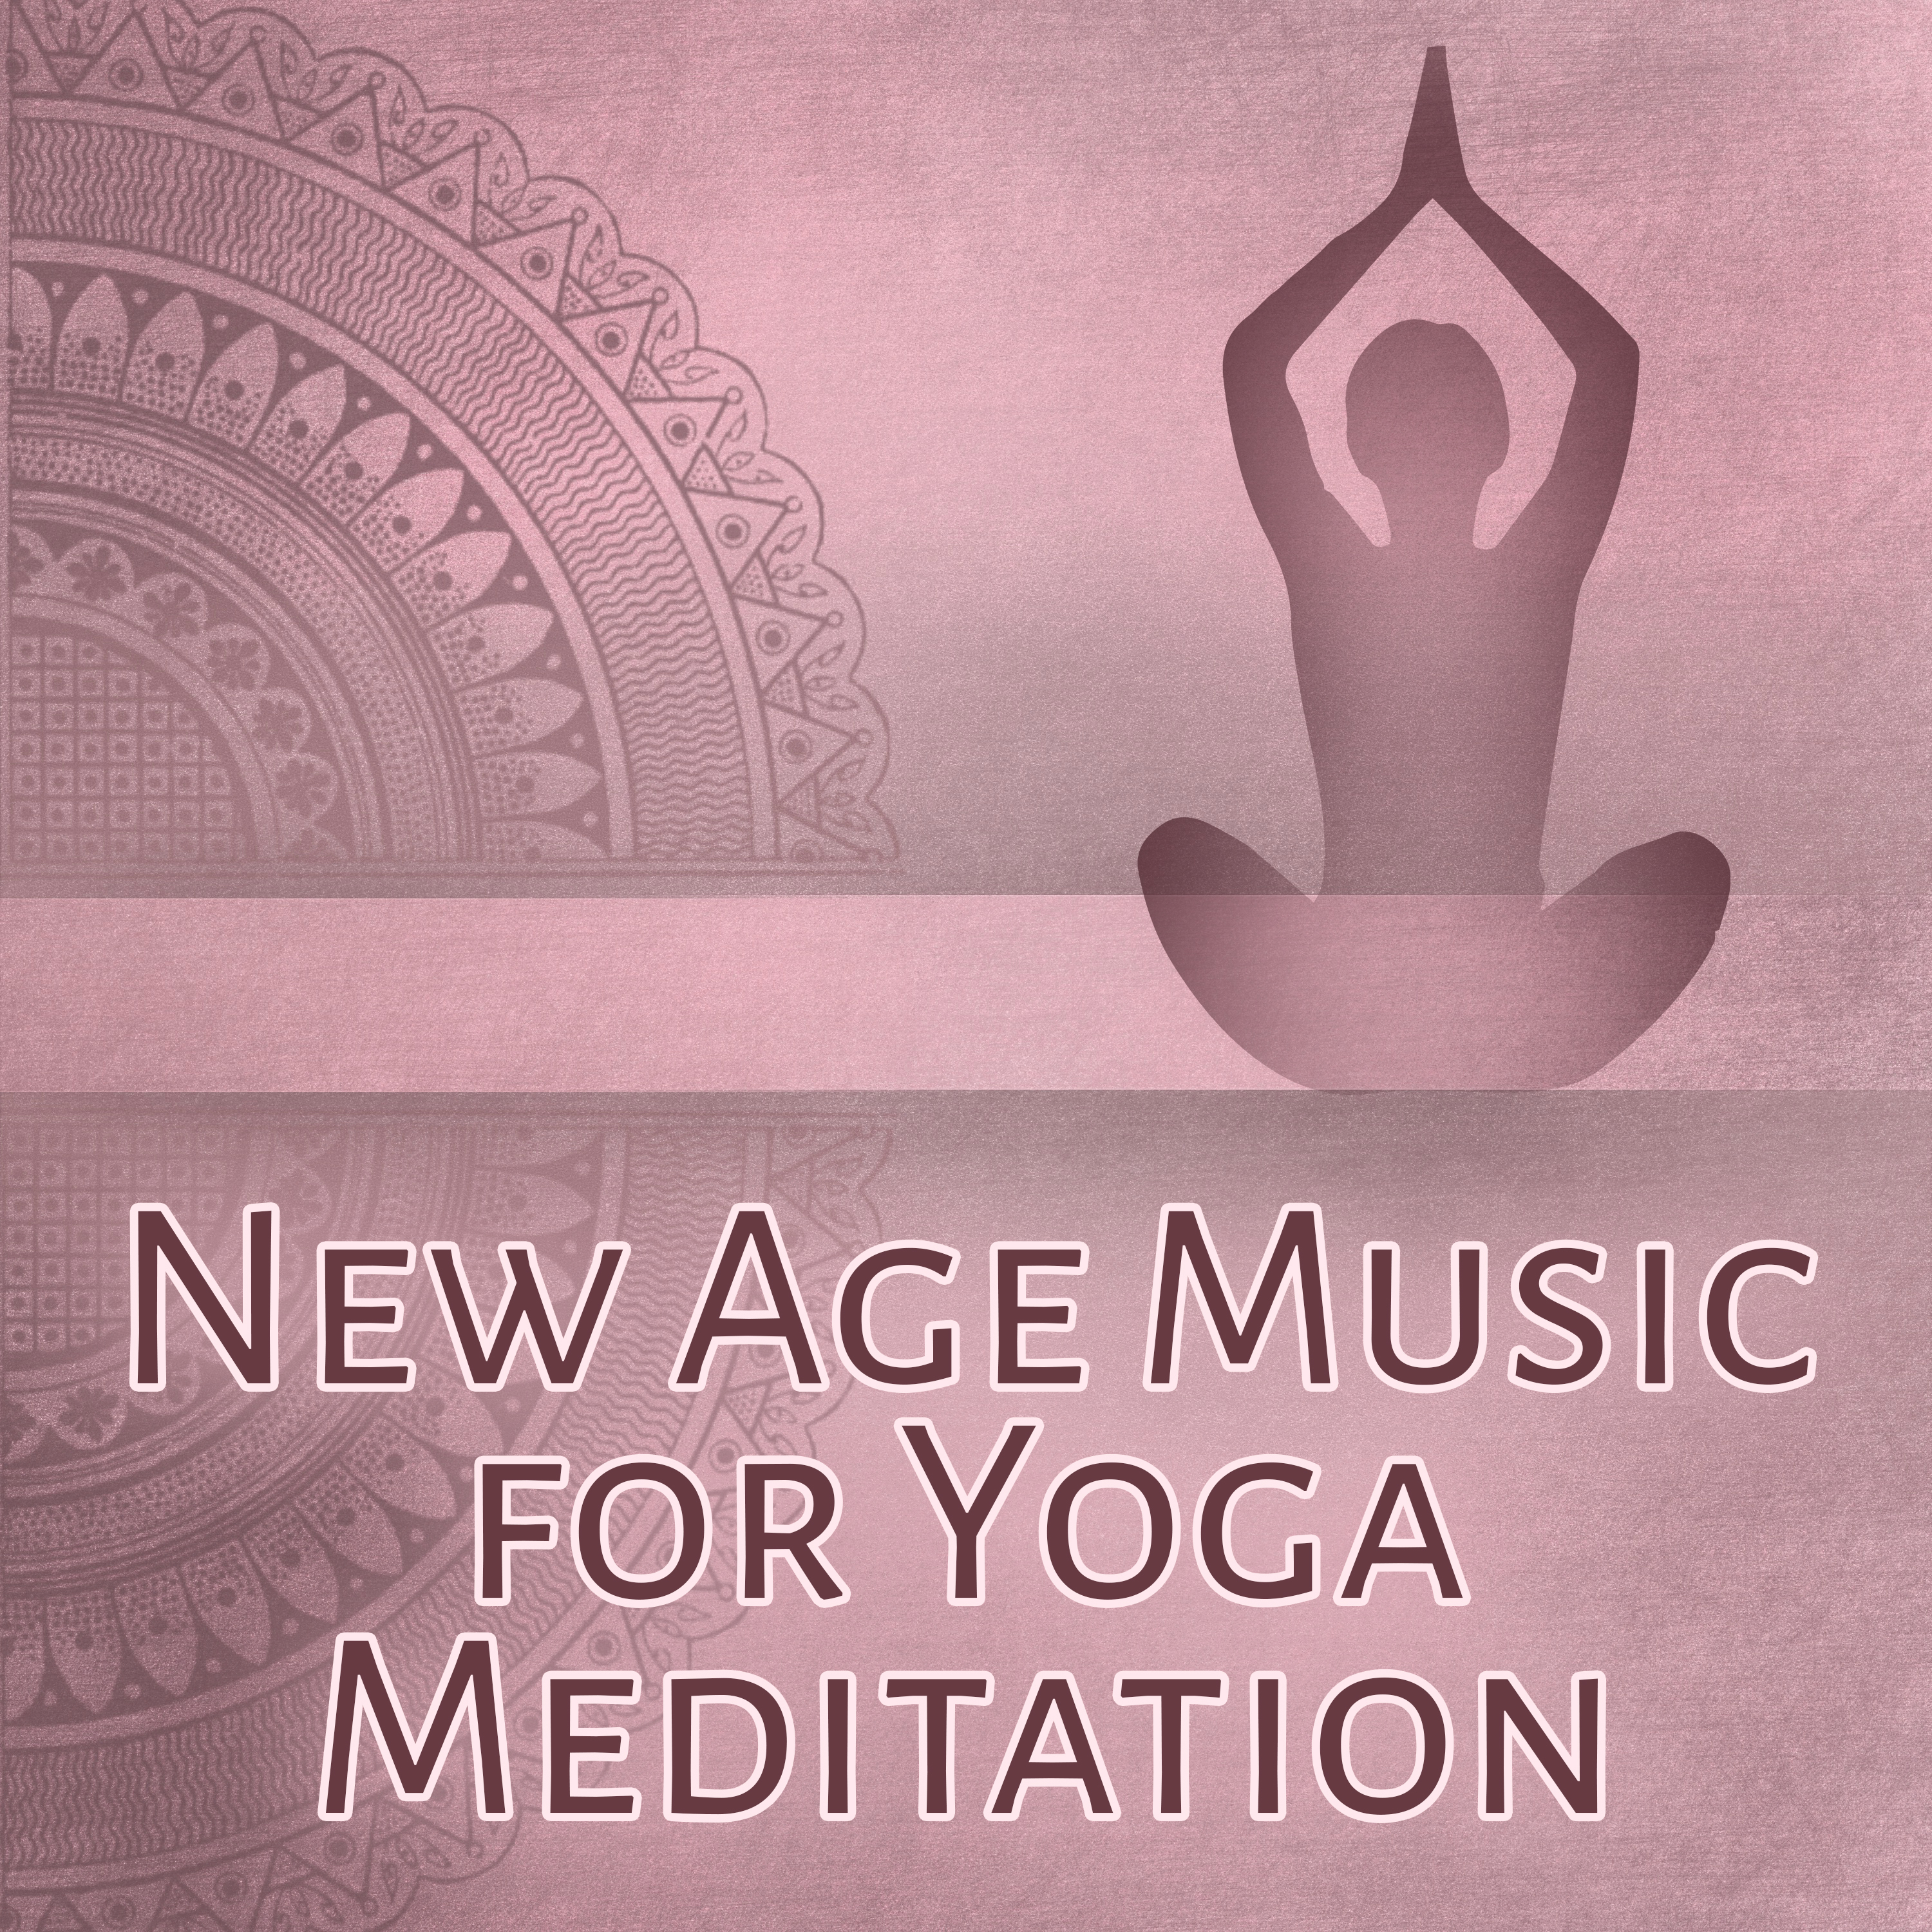 New Age Music for Yoga Meditation  Music for Meditation, Deep Relaxation Sounds of Nature for Yoga, Pilates, Rest